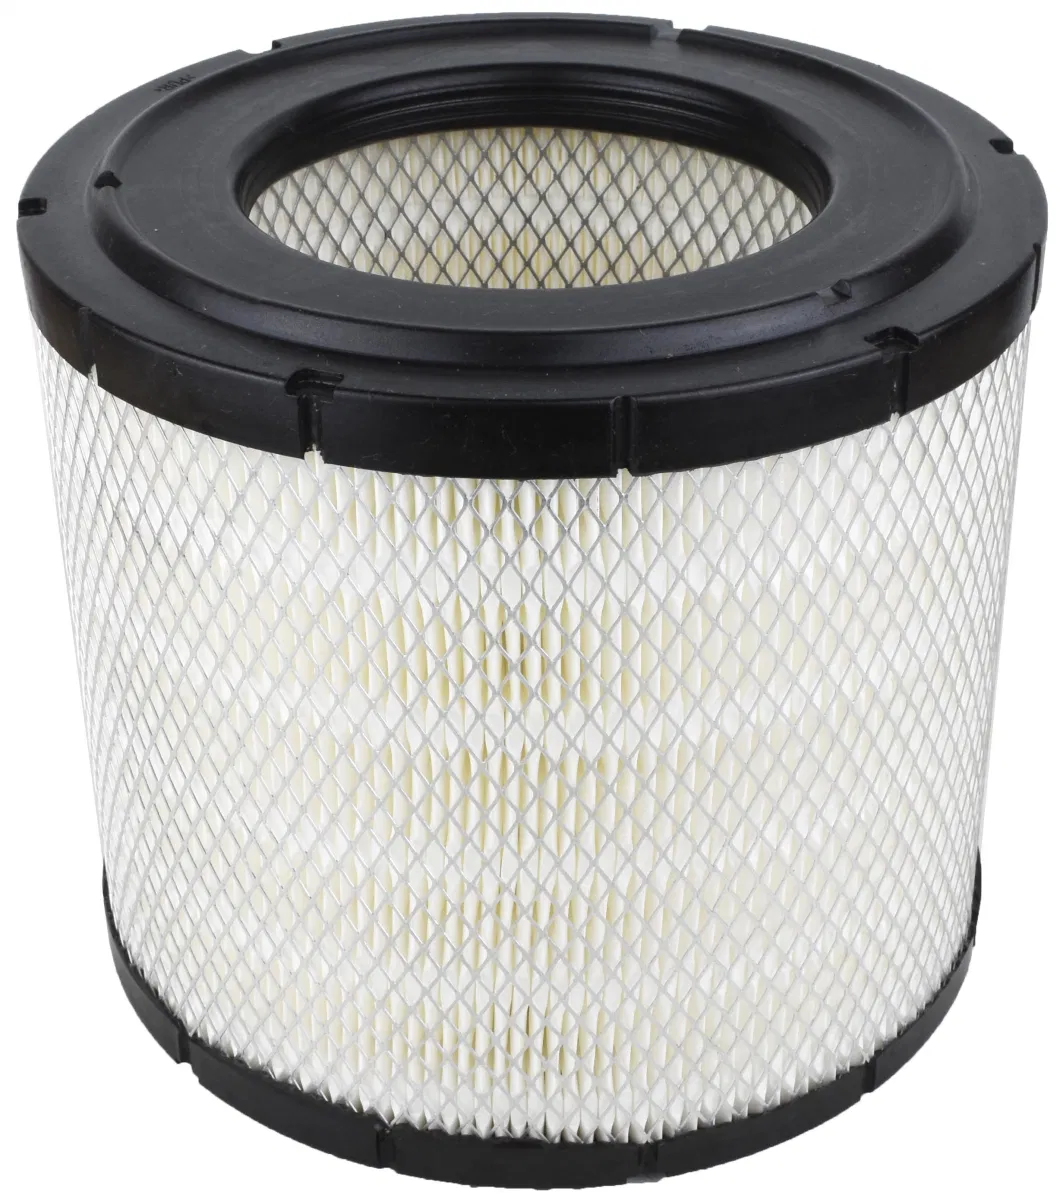 17801-78110 MD7686 A26031 A13570 P634614 for Toyota Donaldson Hino China Factory Air Filter for Auto Parts